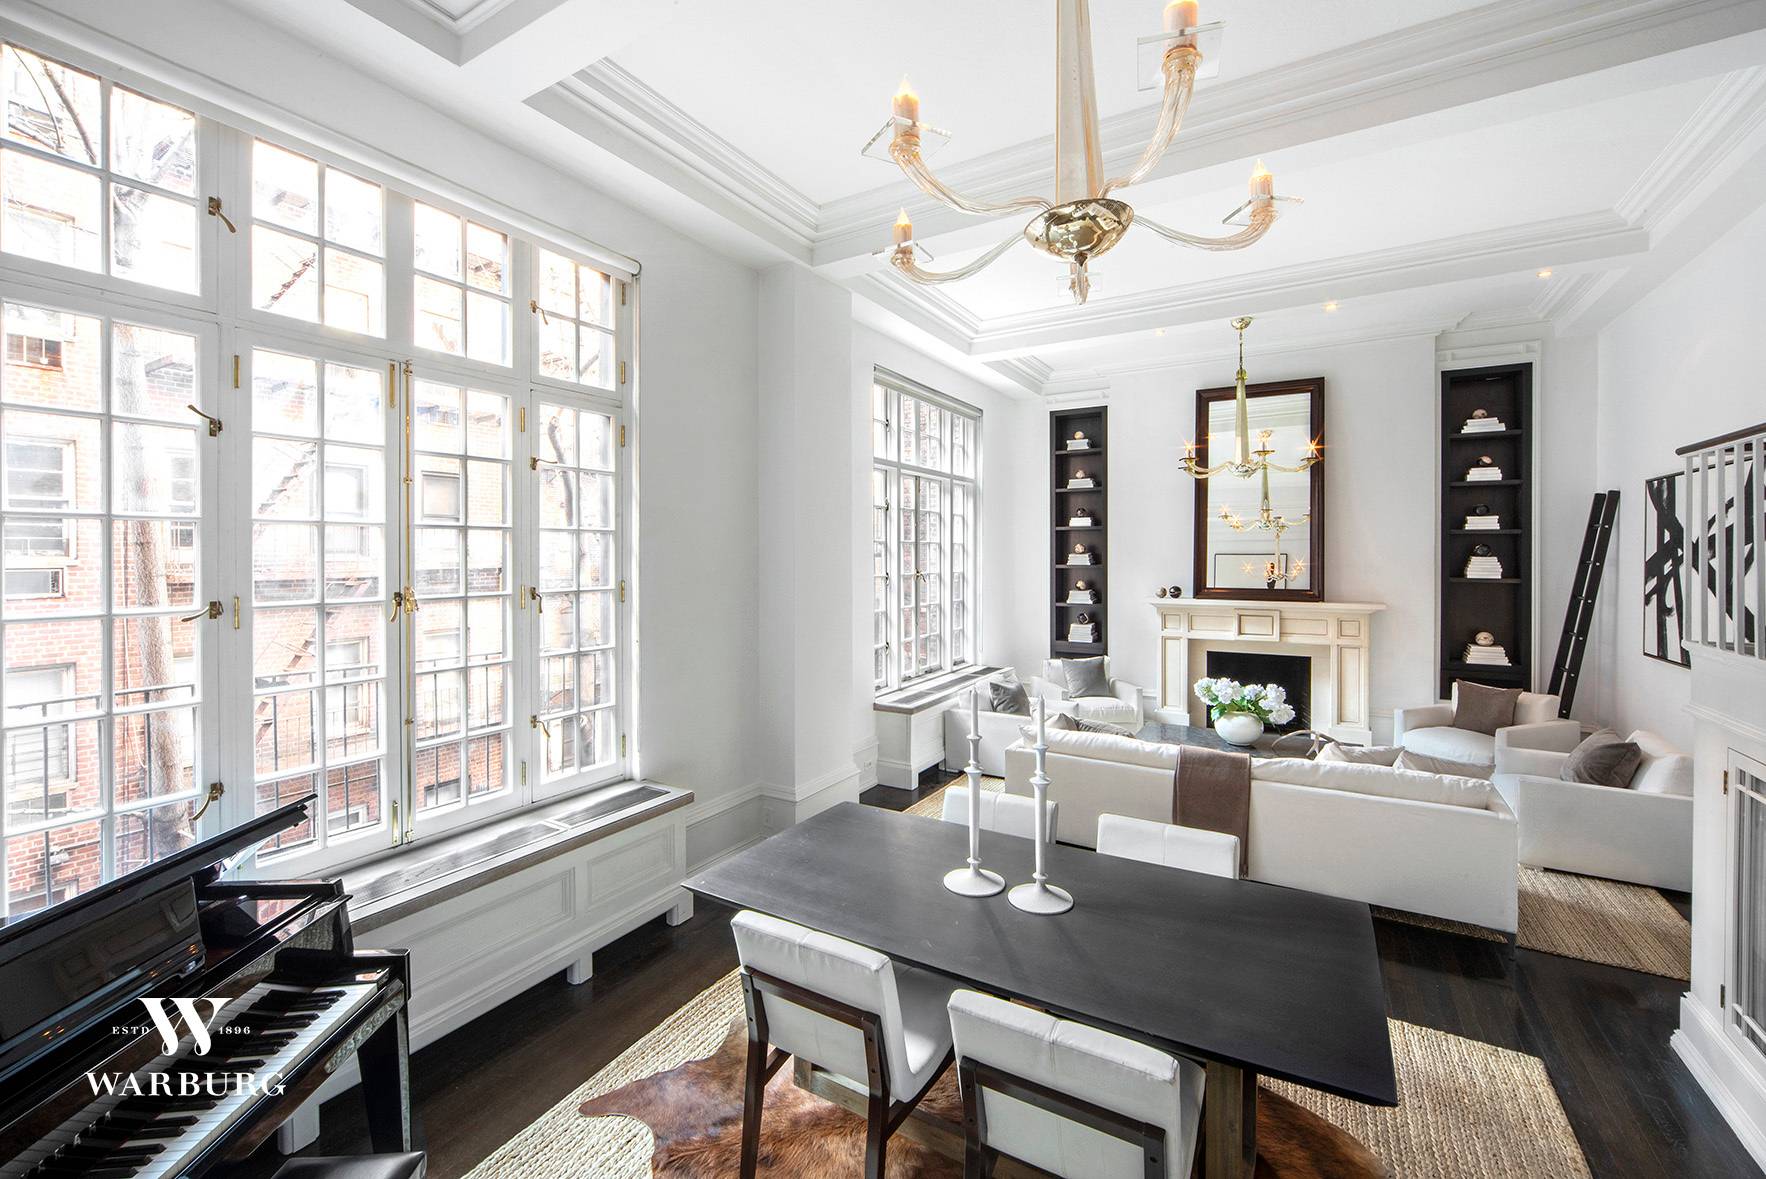 Dramatic double height ceilings and oversized casement windows define this mint condition one bedroom duplex apartment at Morgan Studios, a full service prewar cooperative building.